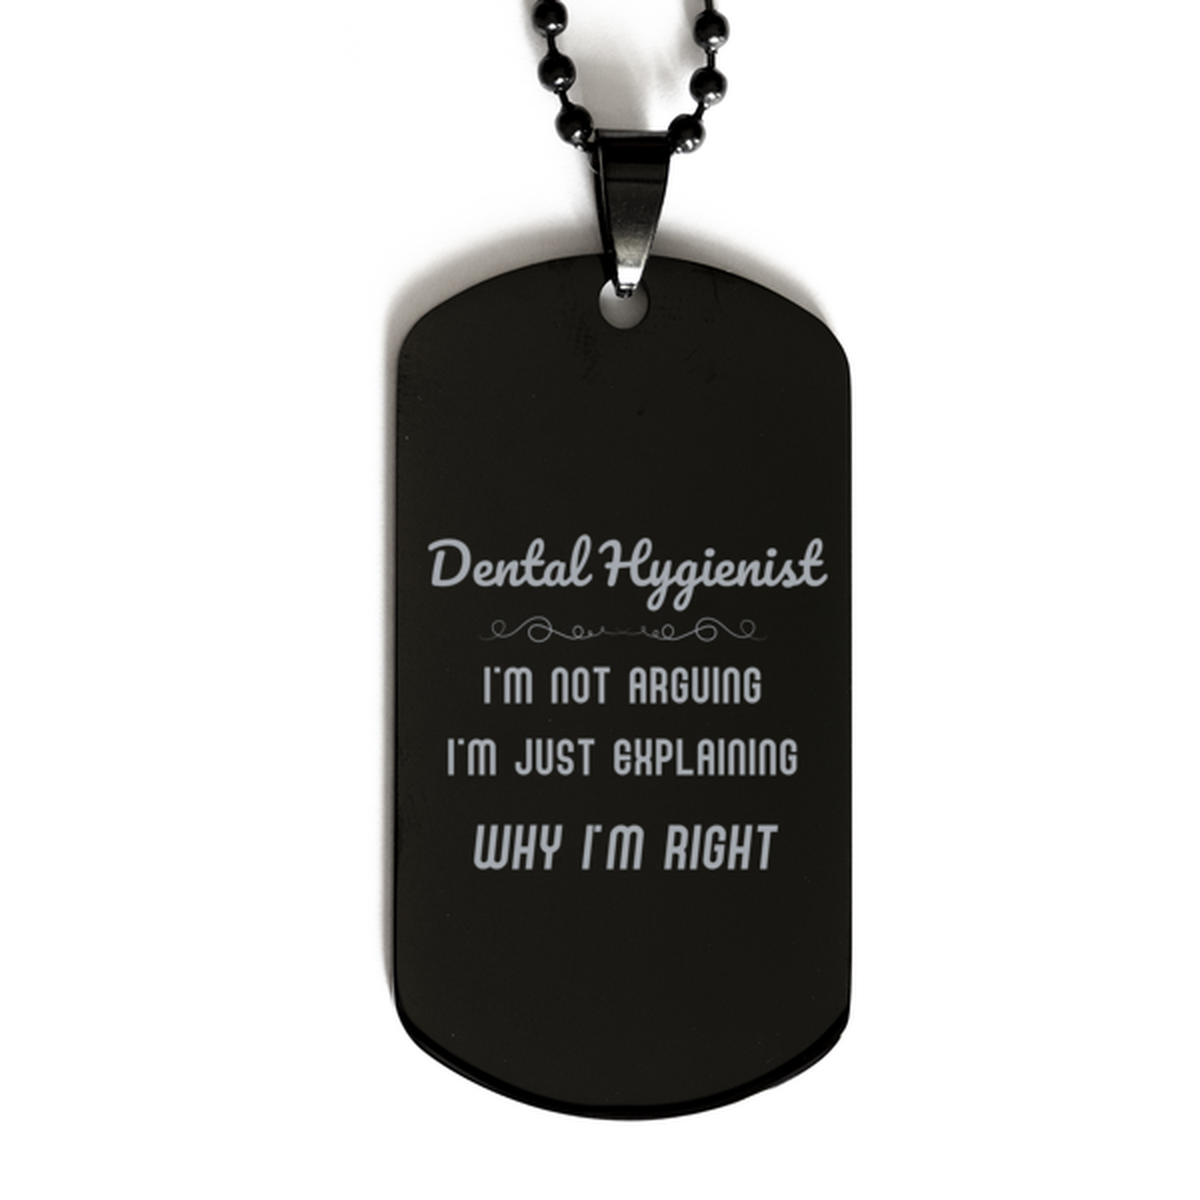 Dental Hygienist I'm not Arguing. I'm Just Explaining Why I'm RIGHT Black Dog Tag, Funny Saying Quote Dental Hygienist Gifts For Dental Hygienist Graduation Birthday Christmas Gifts for Men Women Coworker